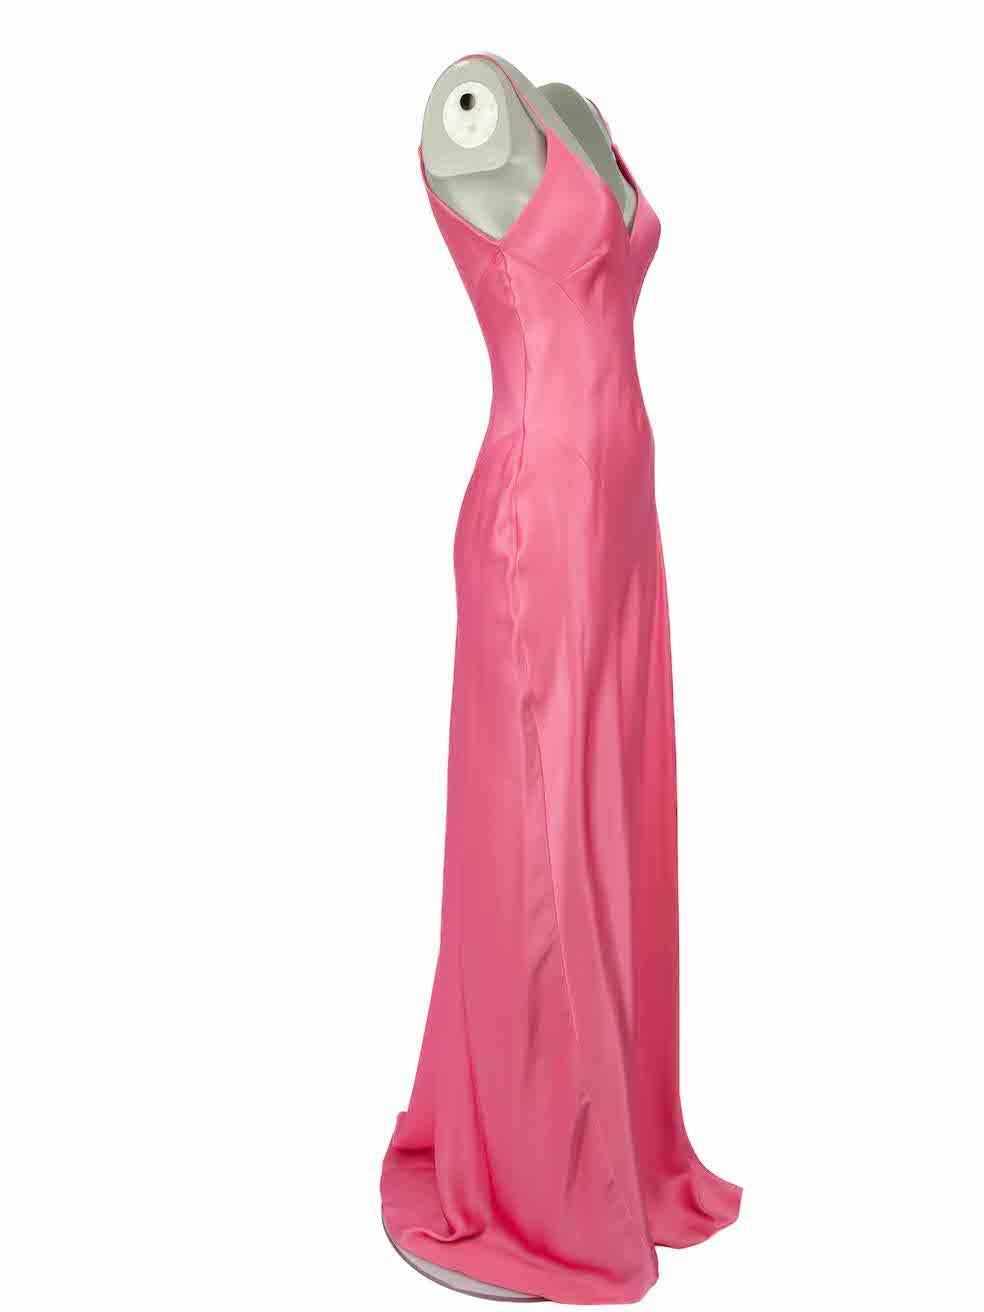 CONDITION is Never worn, with tags. No visible wear to dress is evident on this new Ralph & Russo designer resale item.
  
Details
Pink
Silk
Slip dress
Sleeveless
V-neck
Midi
Front leg slit
Side zip fastening
  
Made in UK
  
Composition
100%